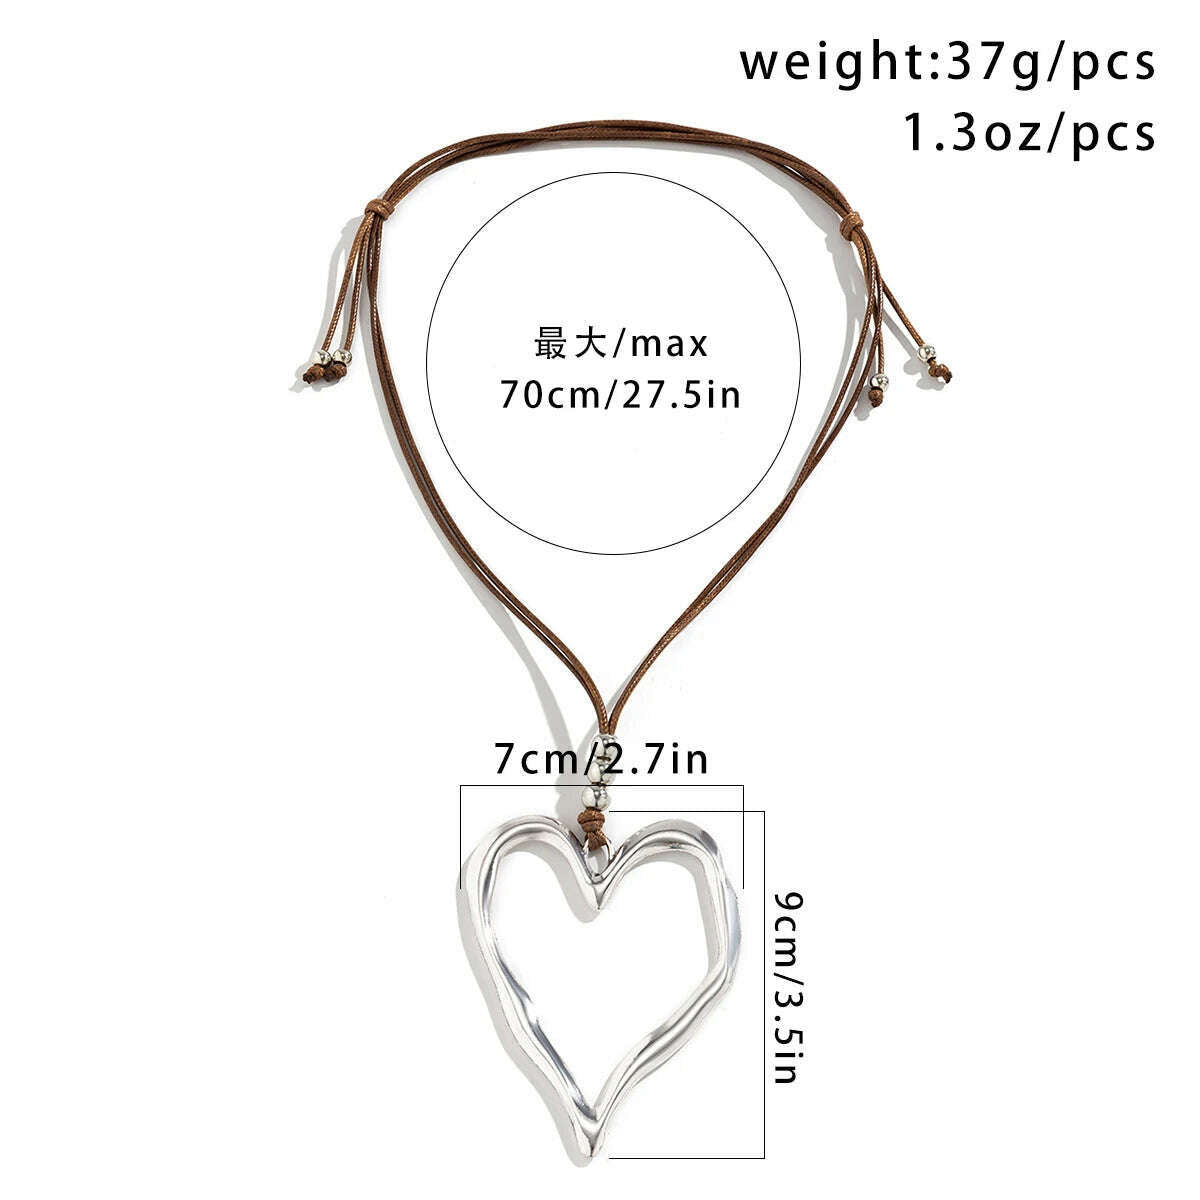 KIMLUD, Exaggerated Big Hollow Heart Pendant Necklace for Women Trendy Bohemia Adjustable Rope Chain on Neck Accessories Fashion Jewelry, KIMLUD Women's Clothes